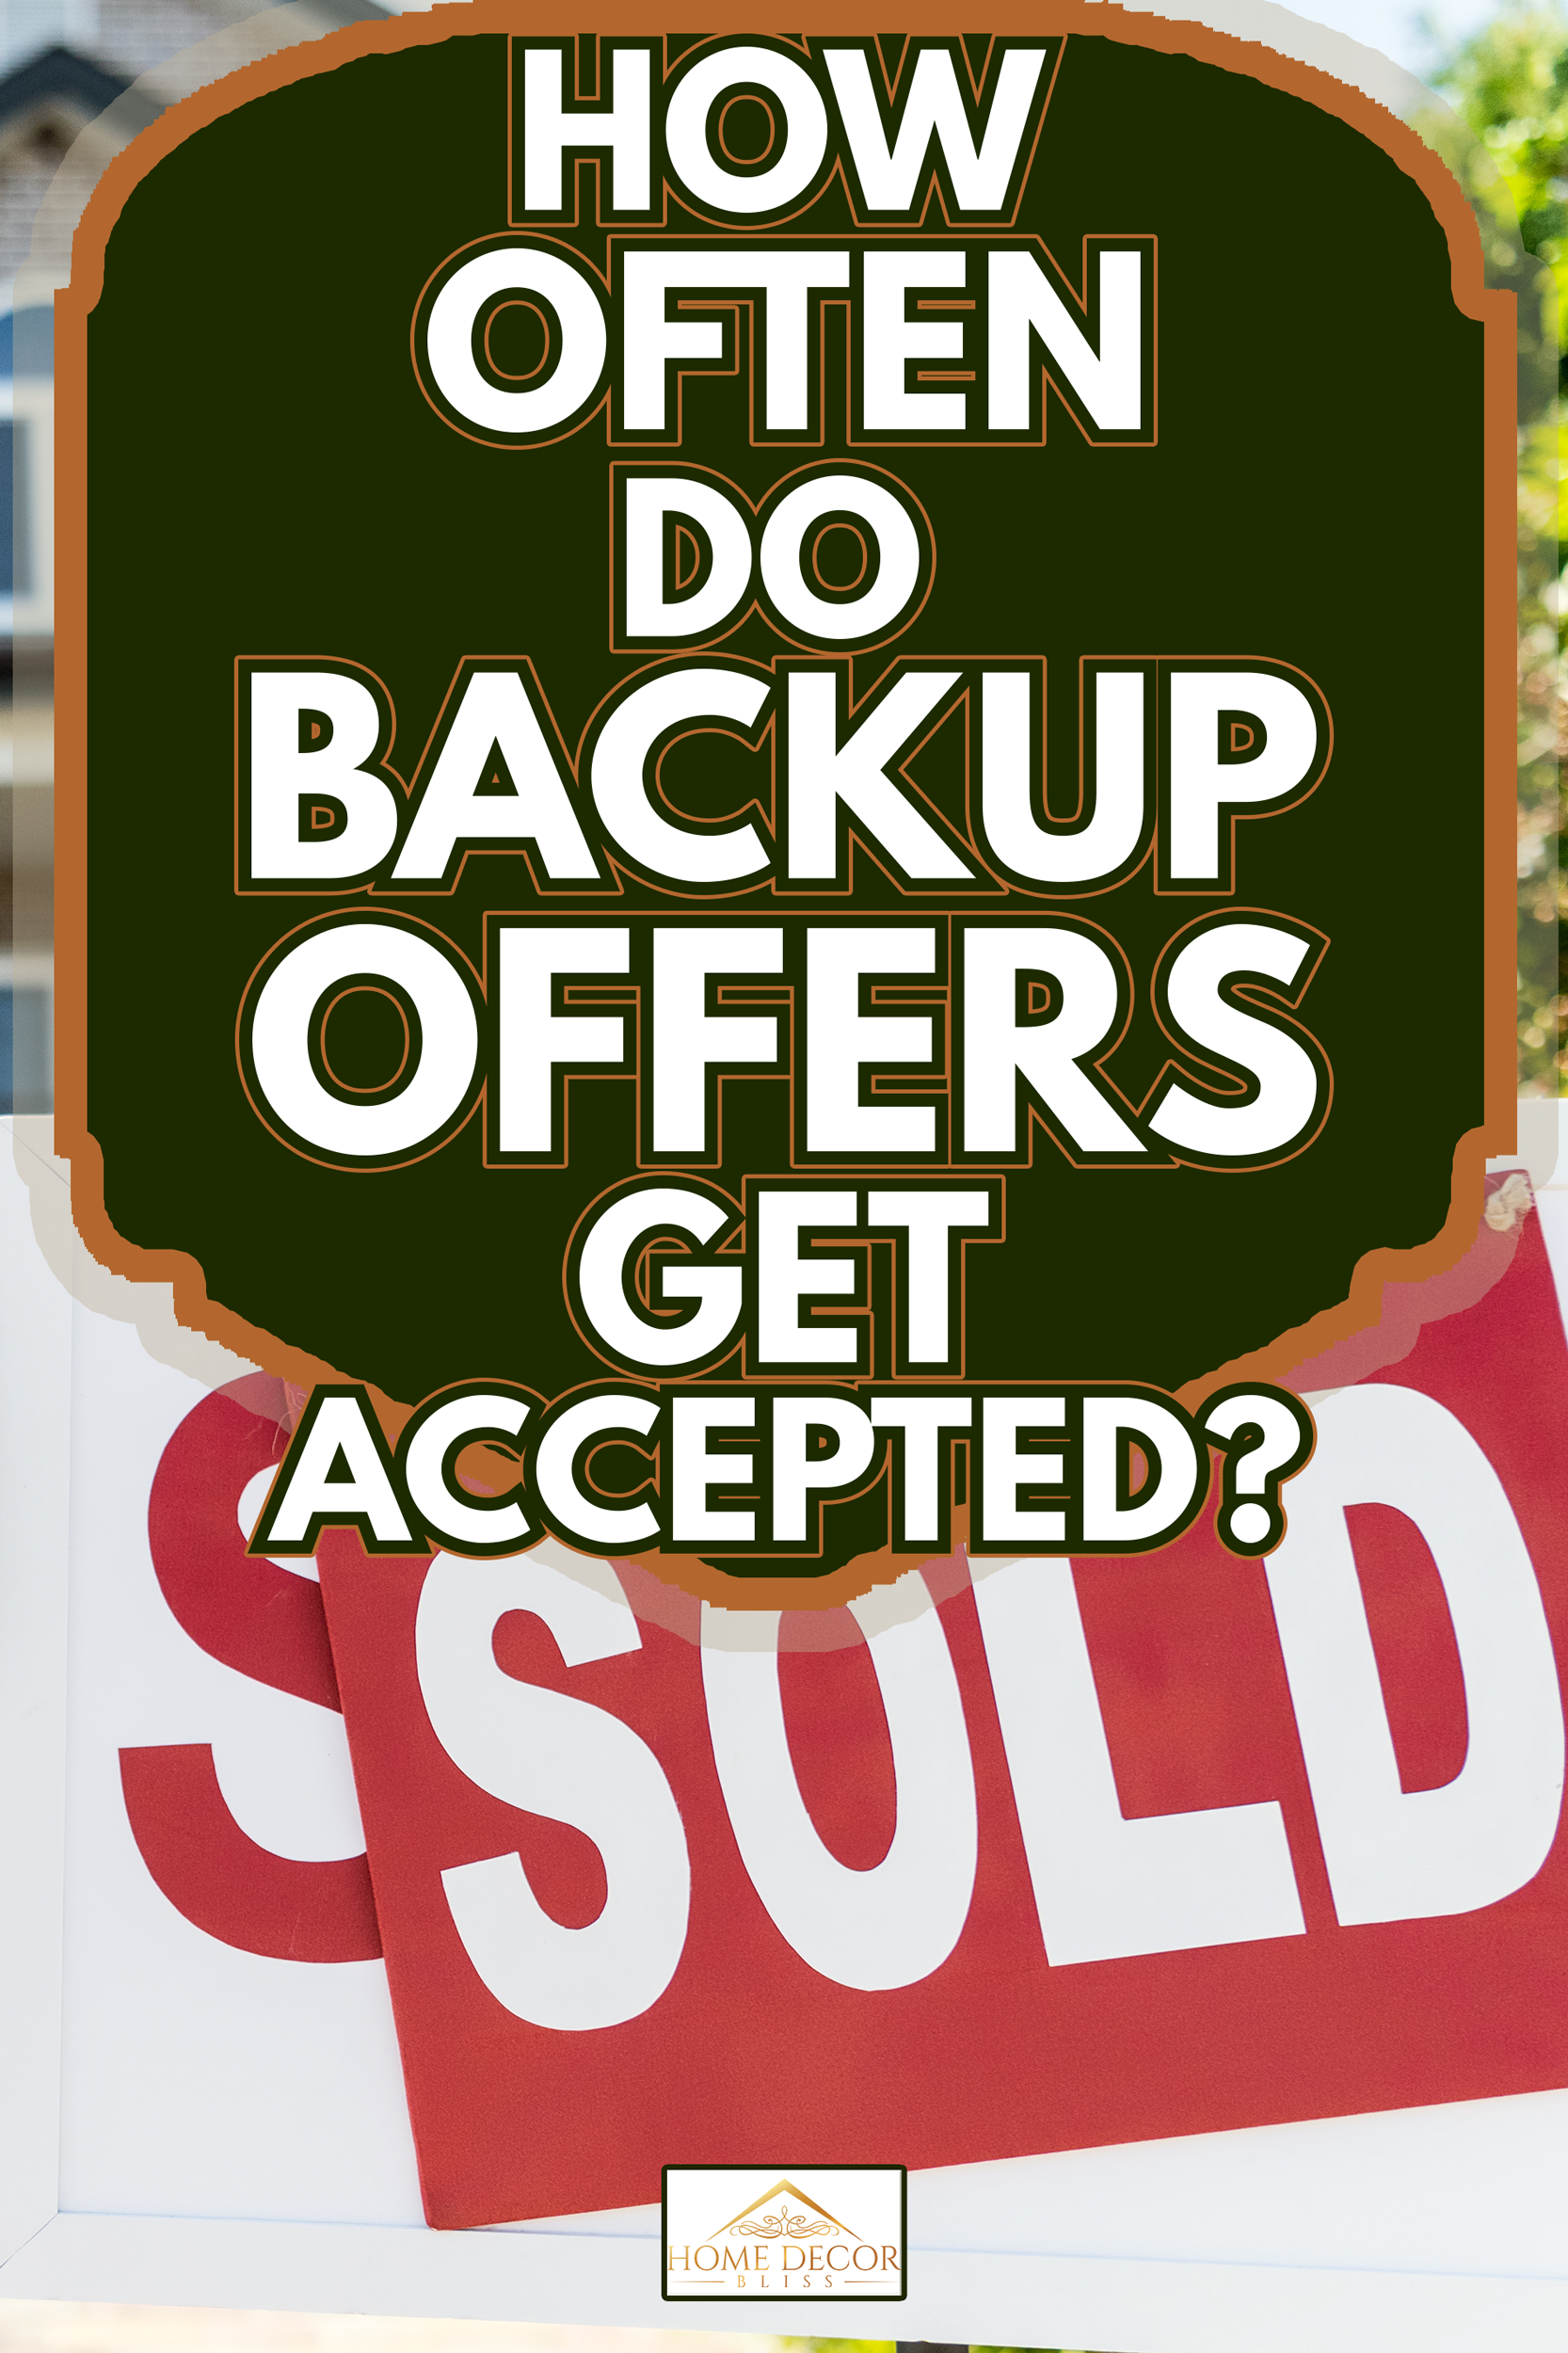 sold house with blurred family on background - How Often Do Backup Offers Get Accepted